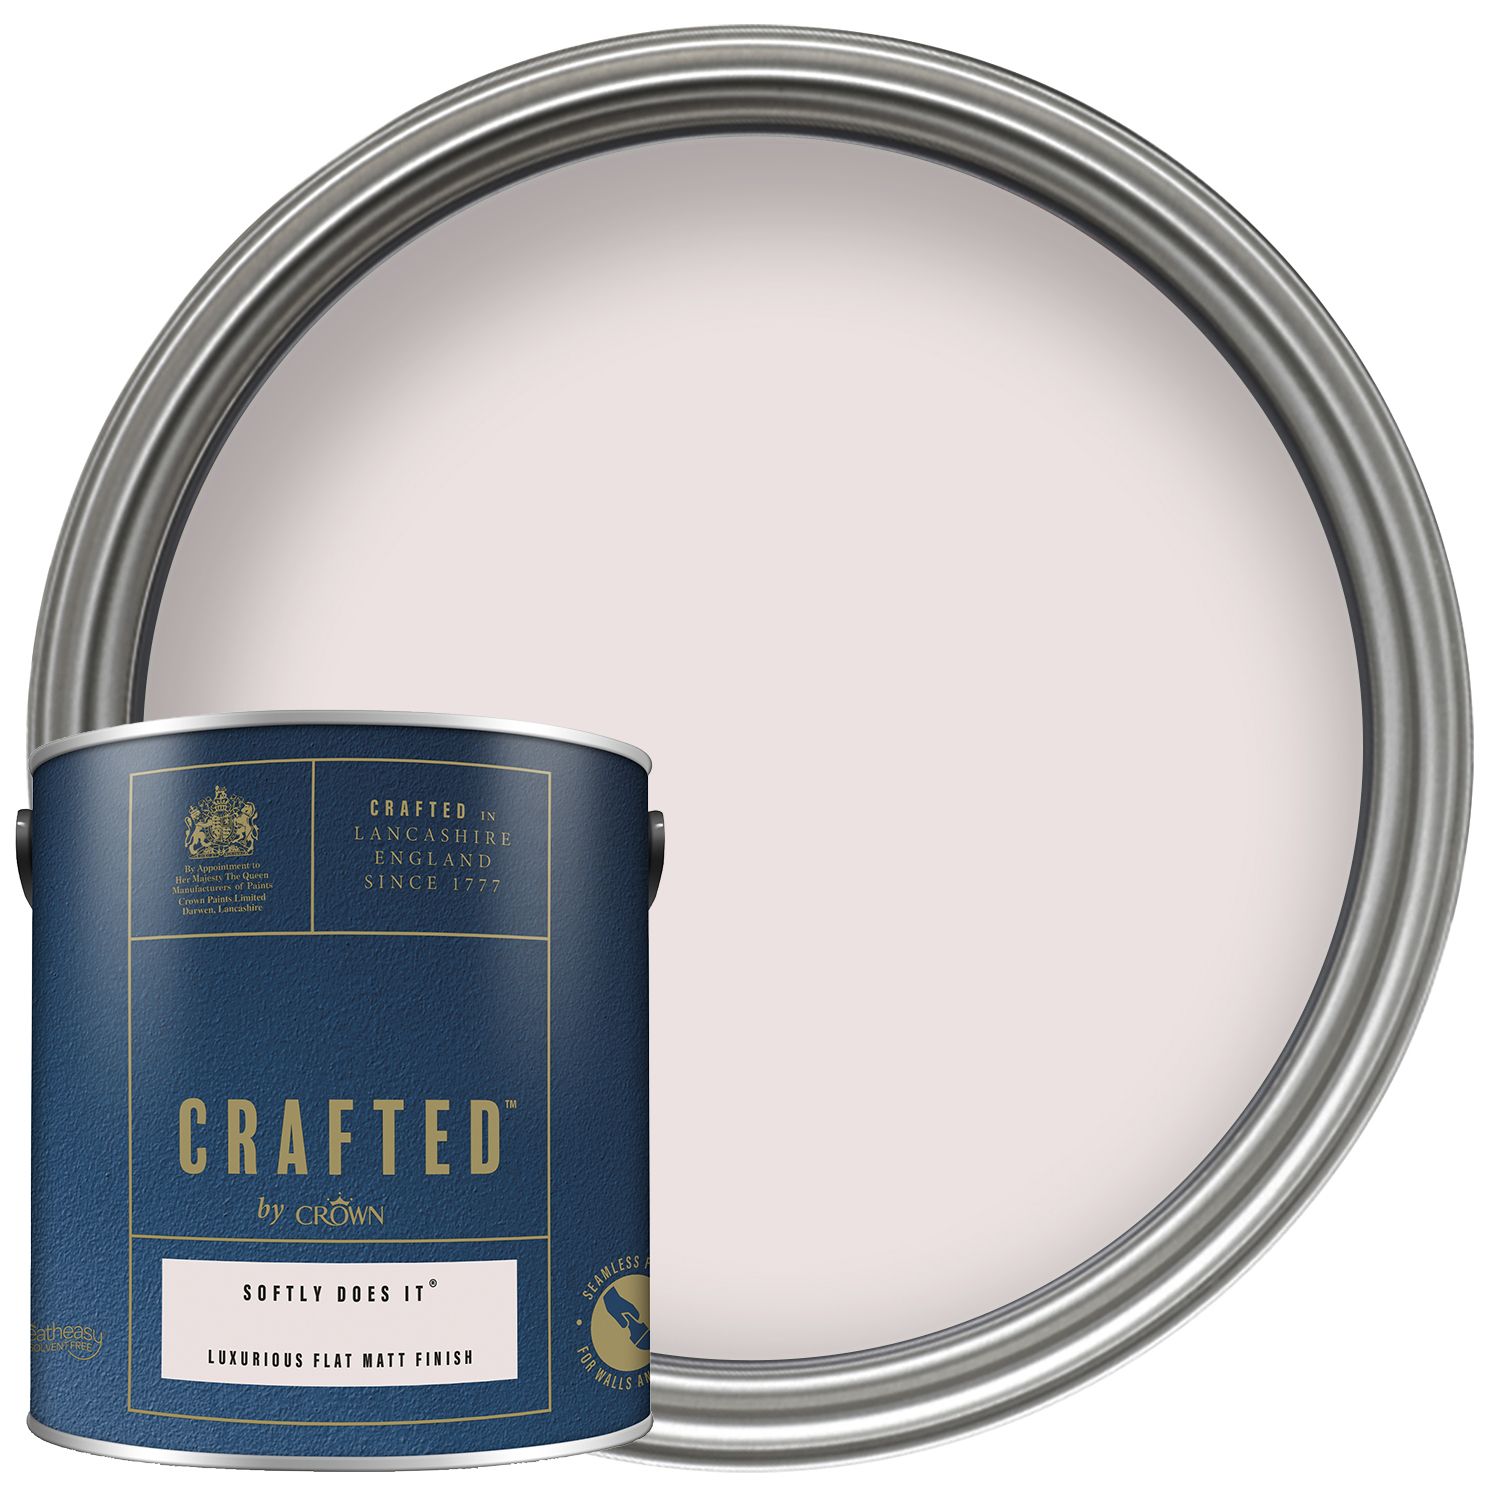 Image of CRAFTED™ by Crown Flat Matt Emulsion Interior Paint - Softly Does It™ - 2.5L